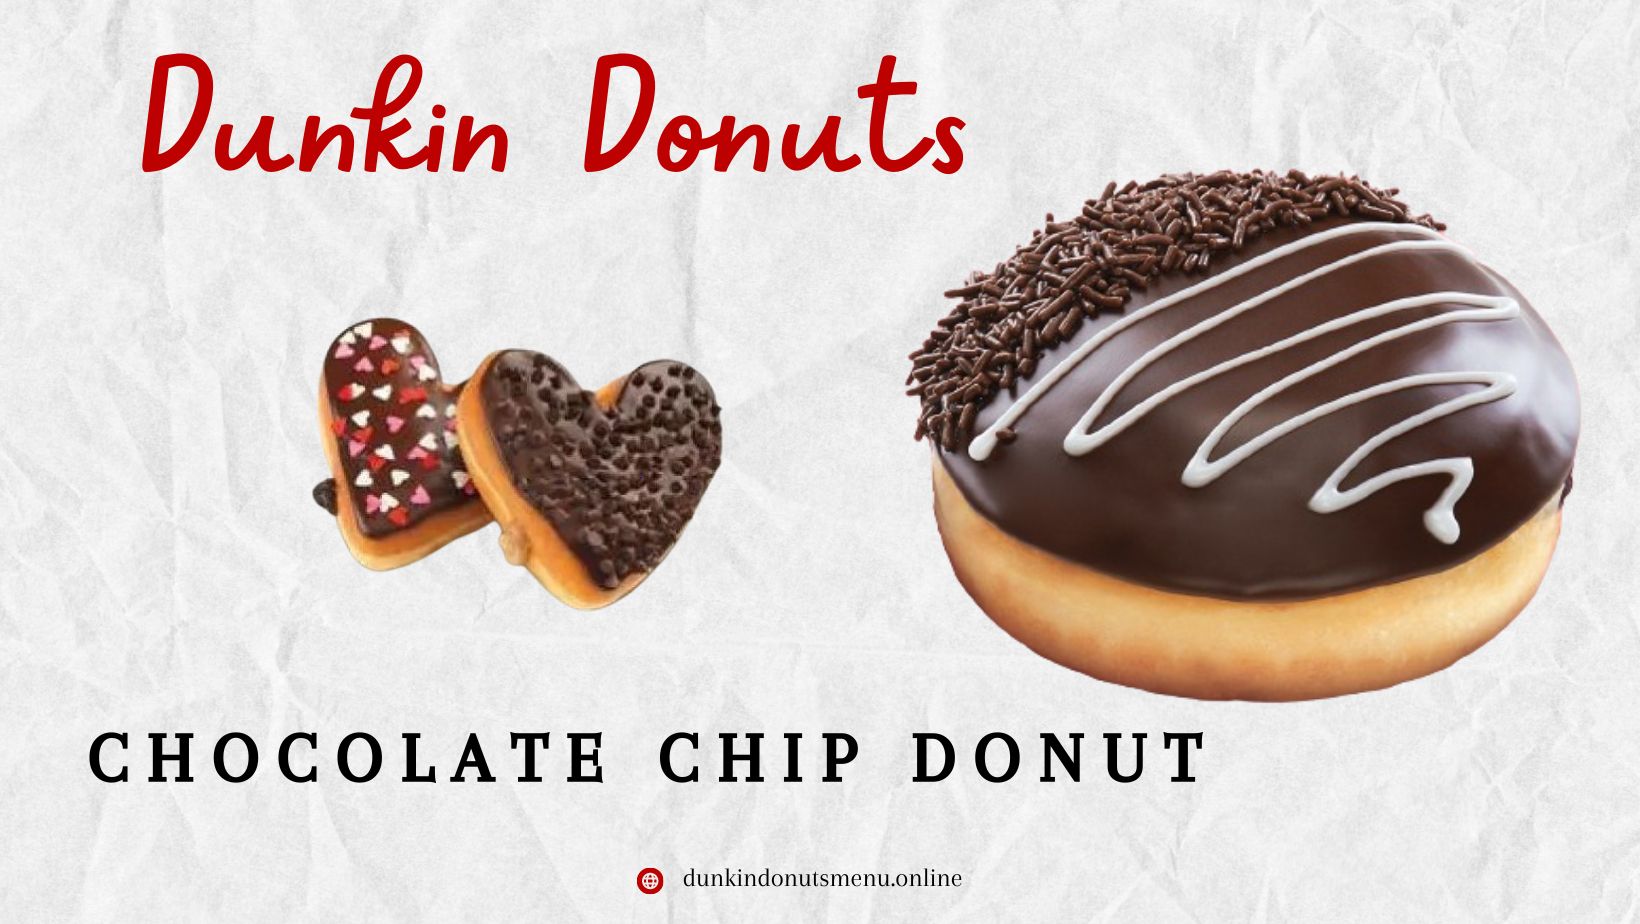 Dunkin Donuts Chocolate Chip Donut Price, Calories, Recipe